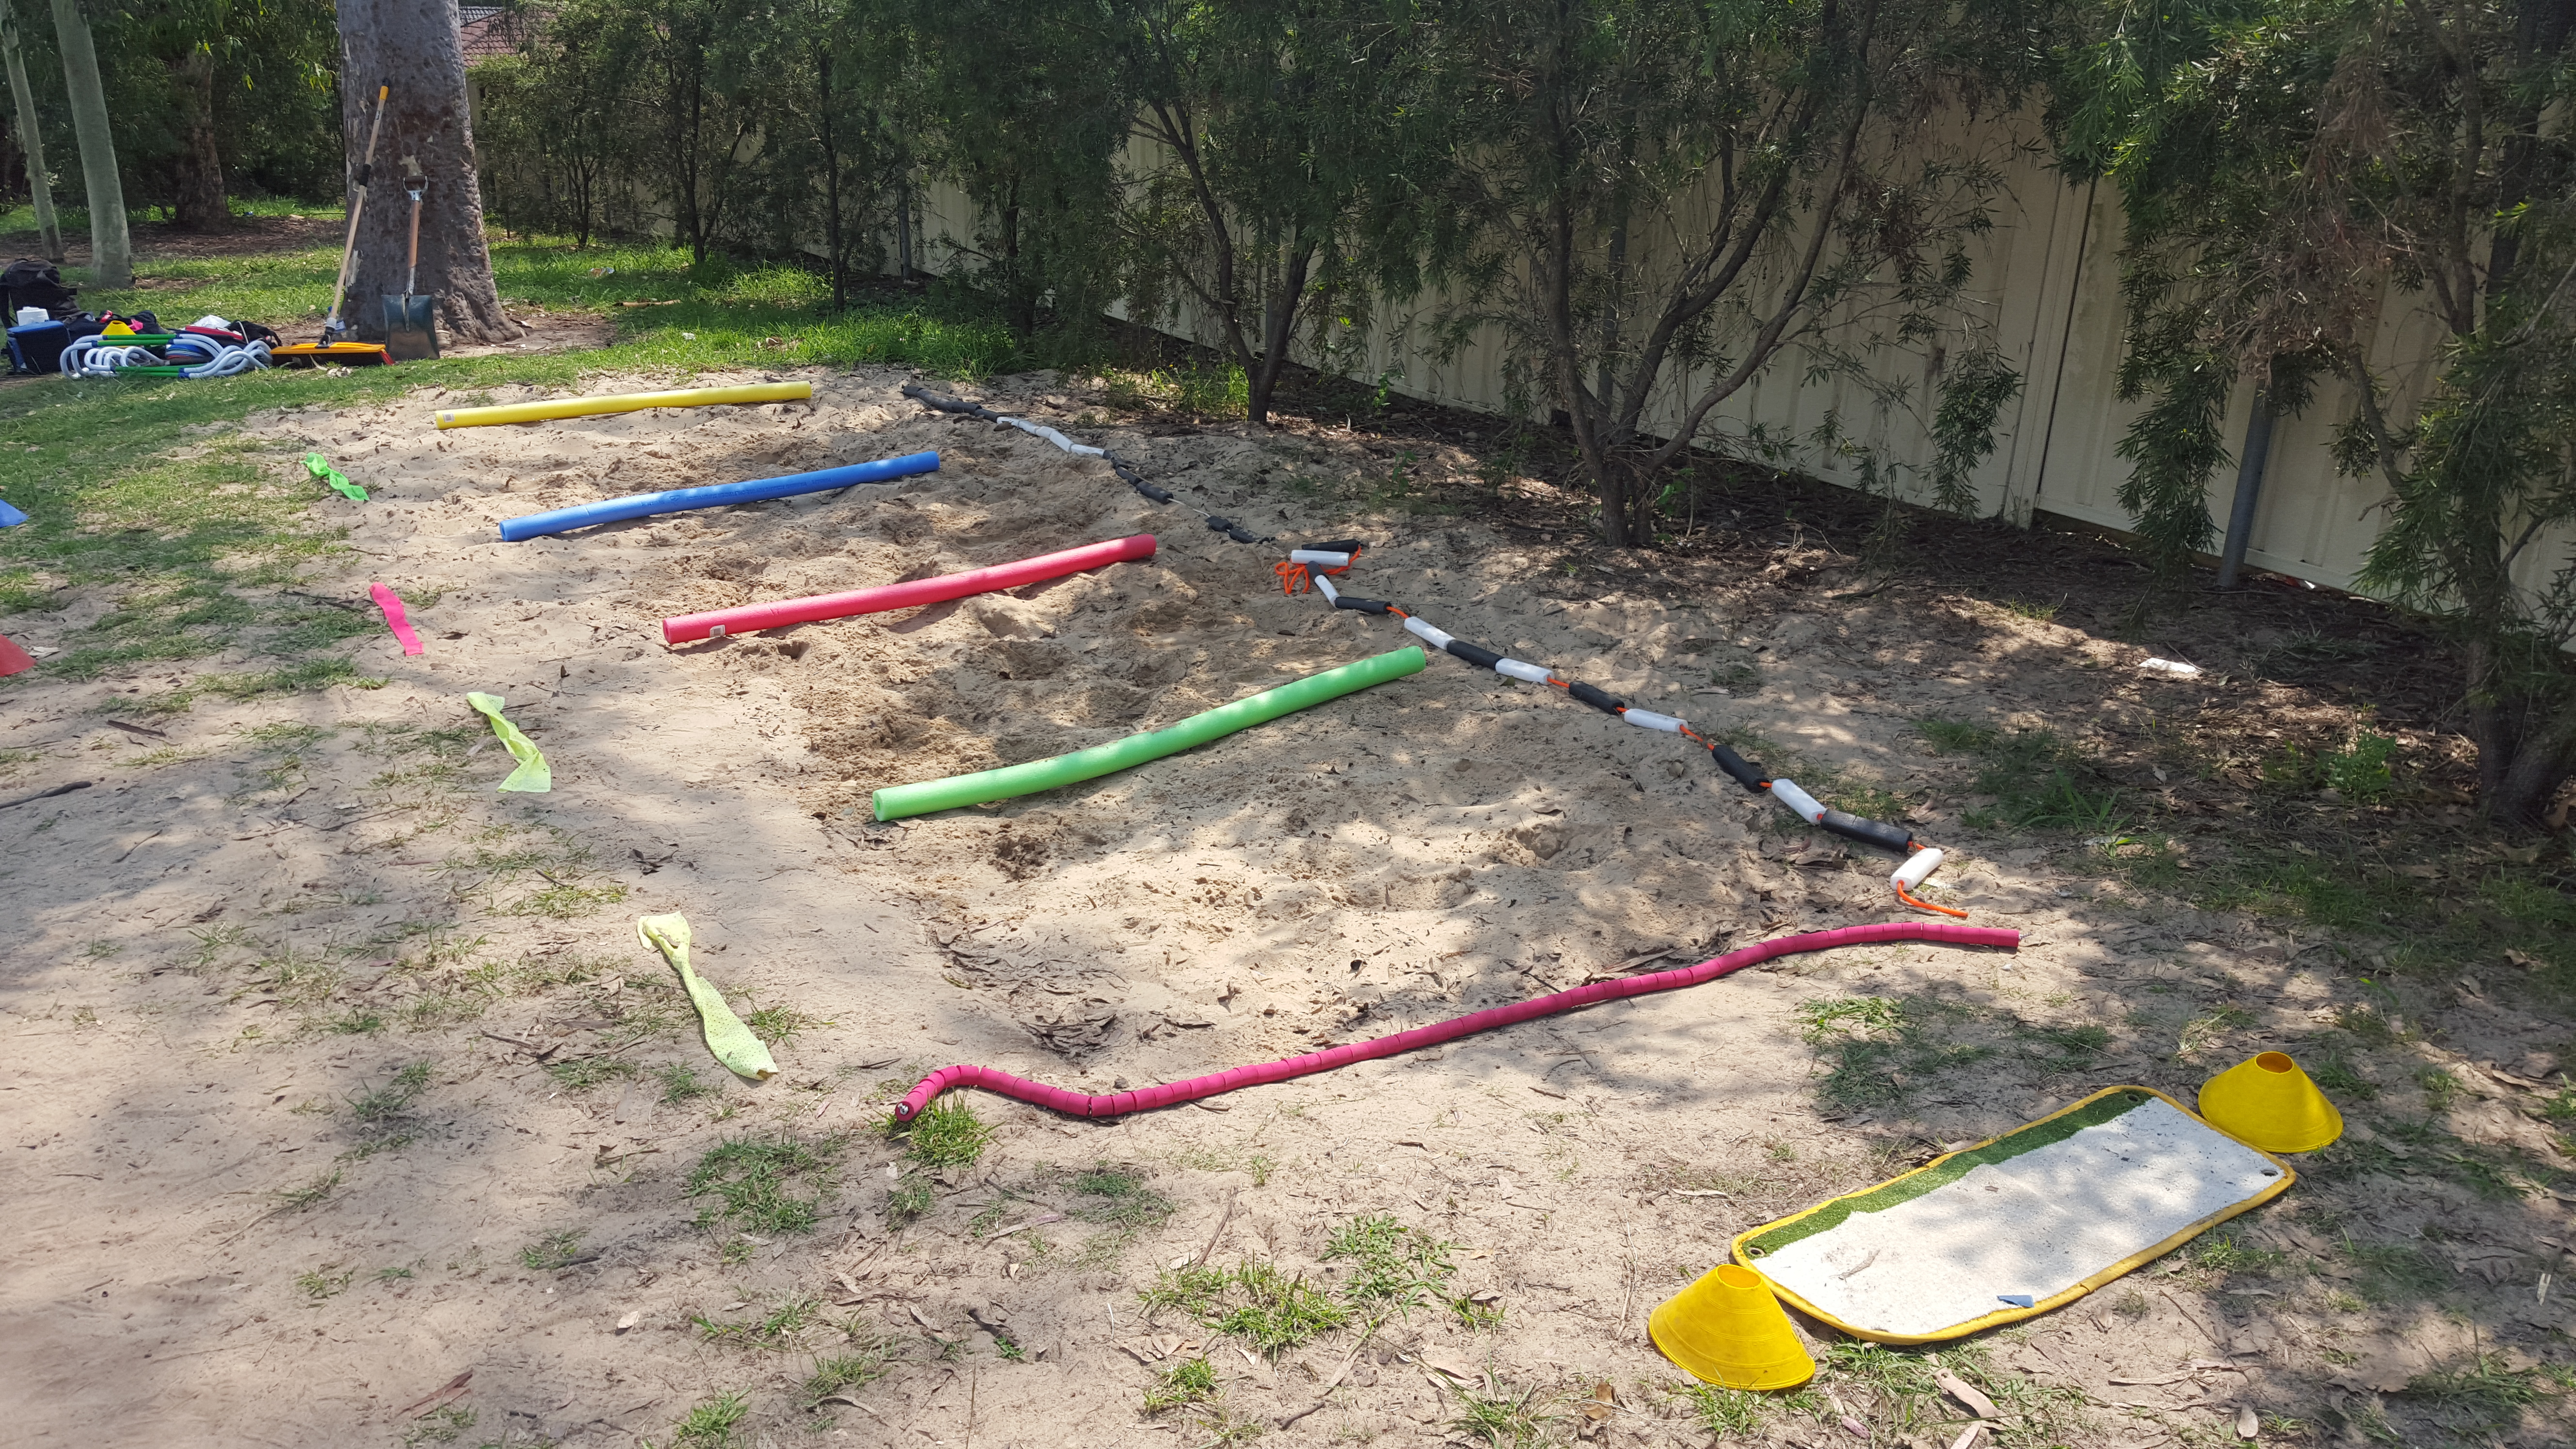 Long jump pit divided by pool noodles